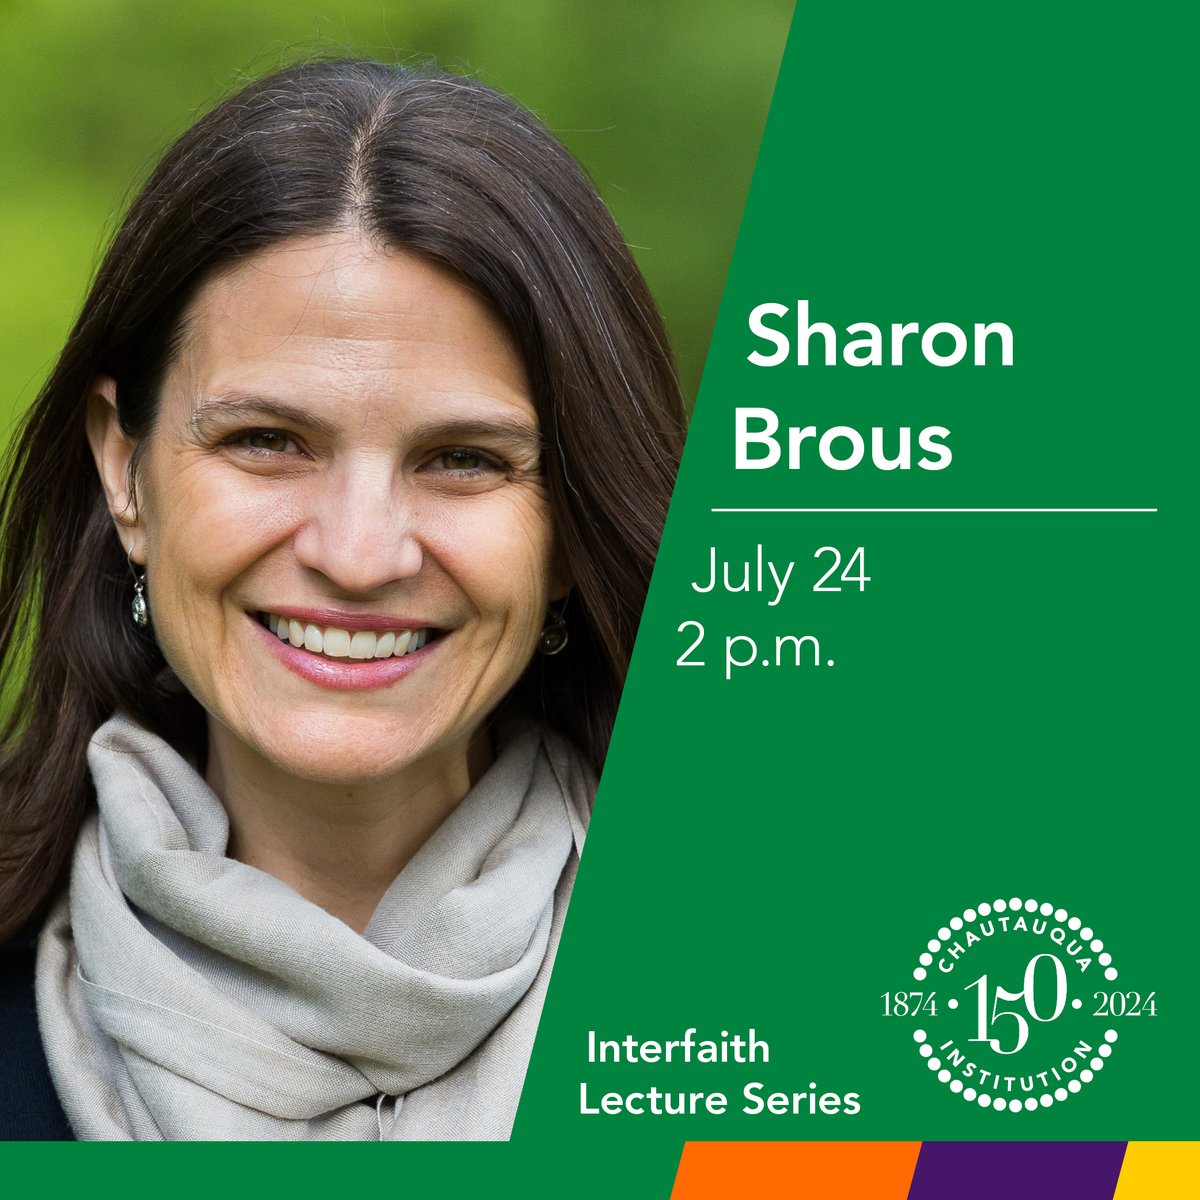 🚨#CHQ2024 ANNOUNCEMENT🚨 We are thrilled to welcome senior founding rabbi of of IKAR, Sharon Brous to our 2024 Interfaith Lecture Series, as Chautauqua celebrates 150 years! #CHQ2024 #chq150 #INFWeekFive